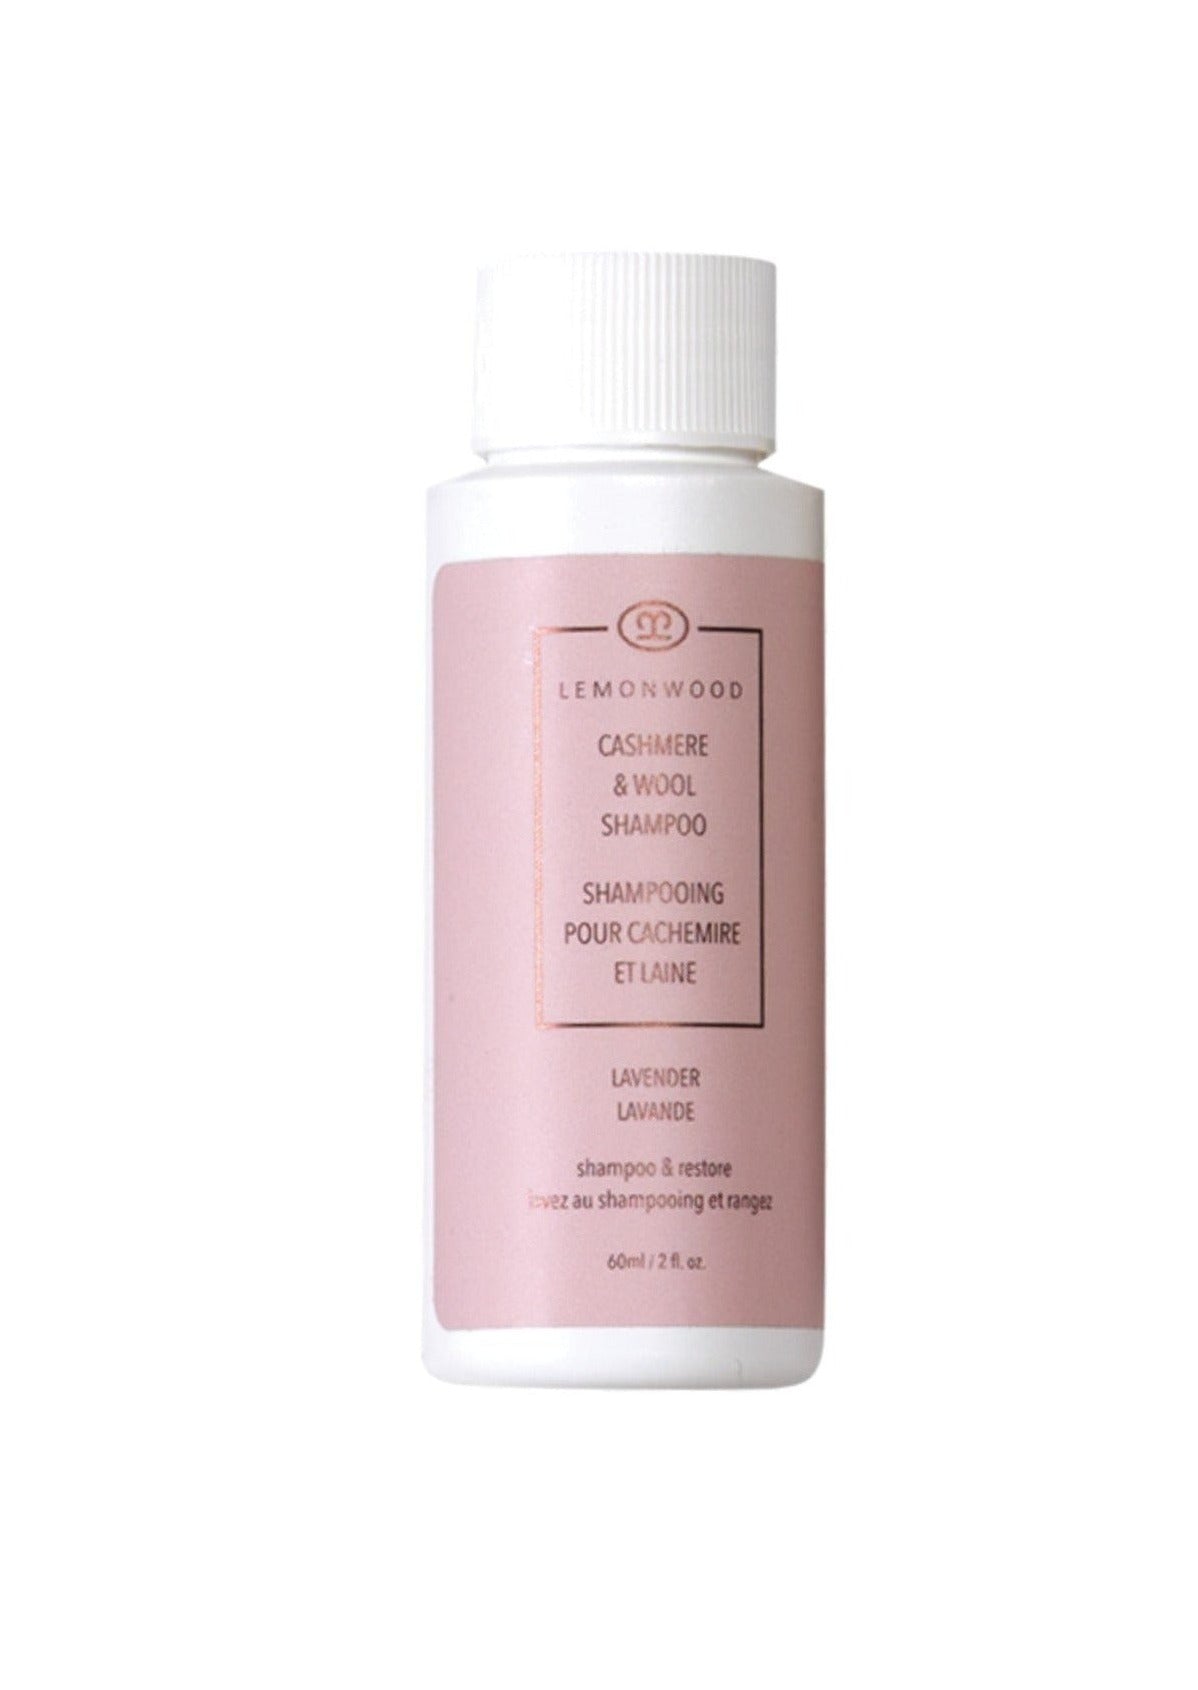 Cashmere Lavender Oil Cashmere and Wool Shampoo 60ml